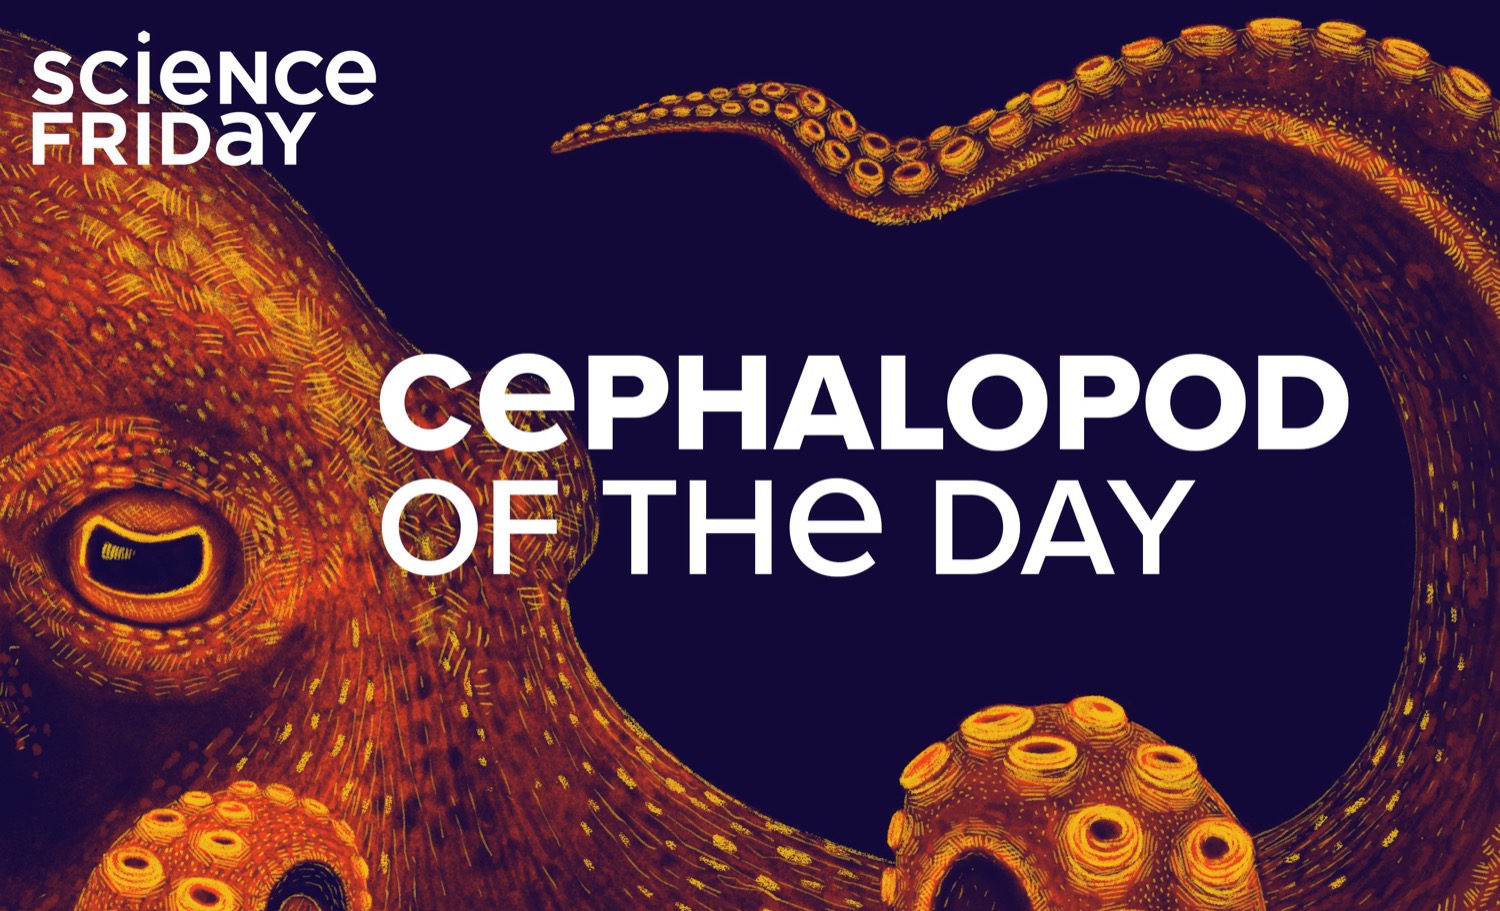 An illustration of an orange octopus with text 'science friday, cephalopod of the day'